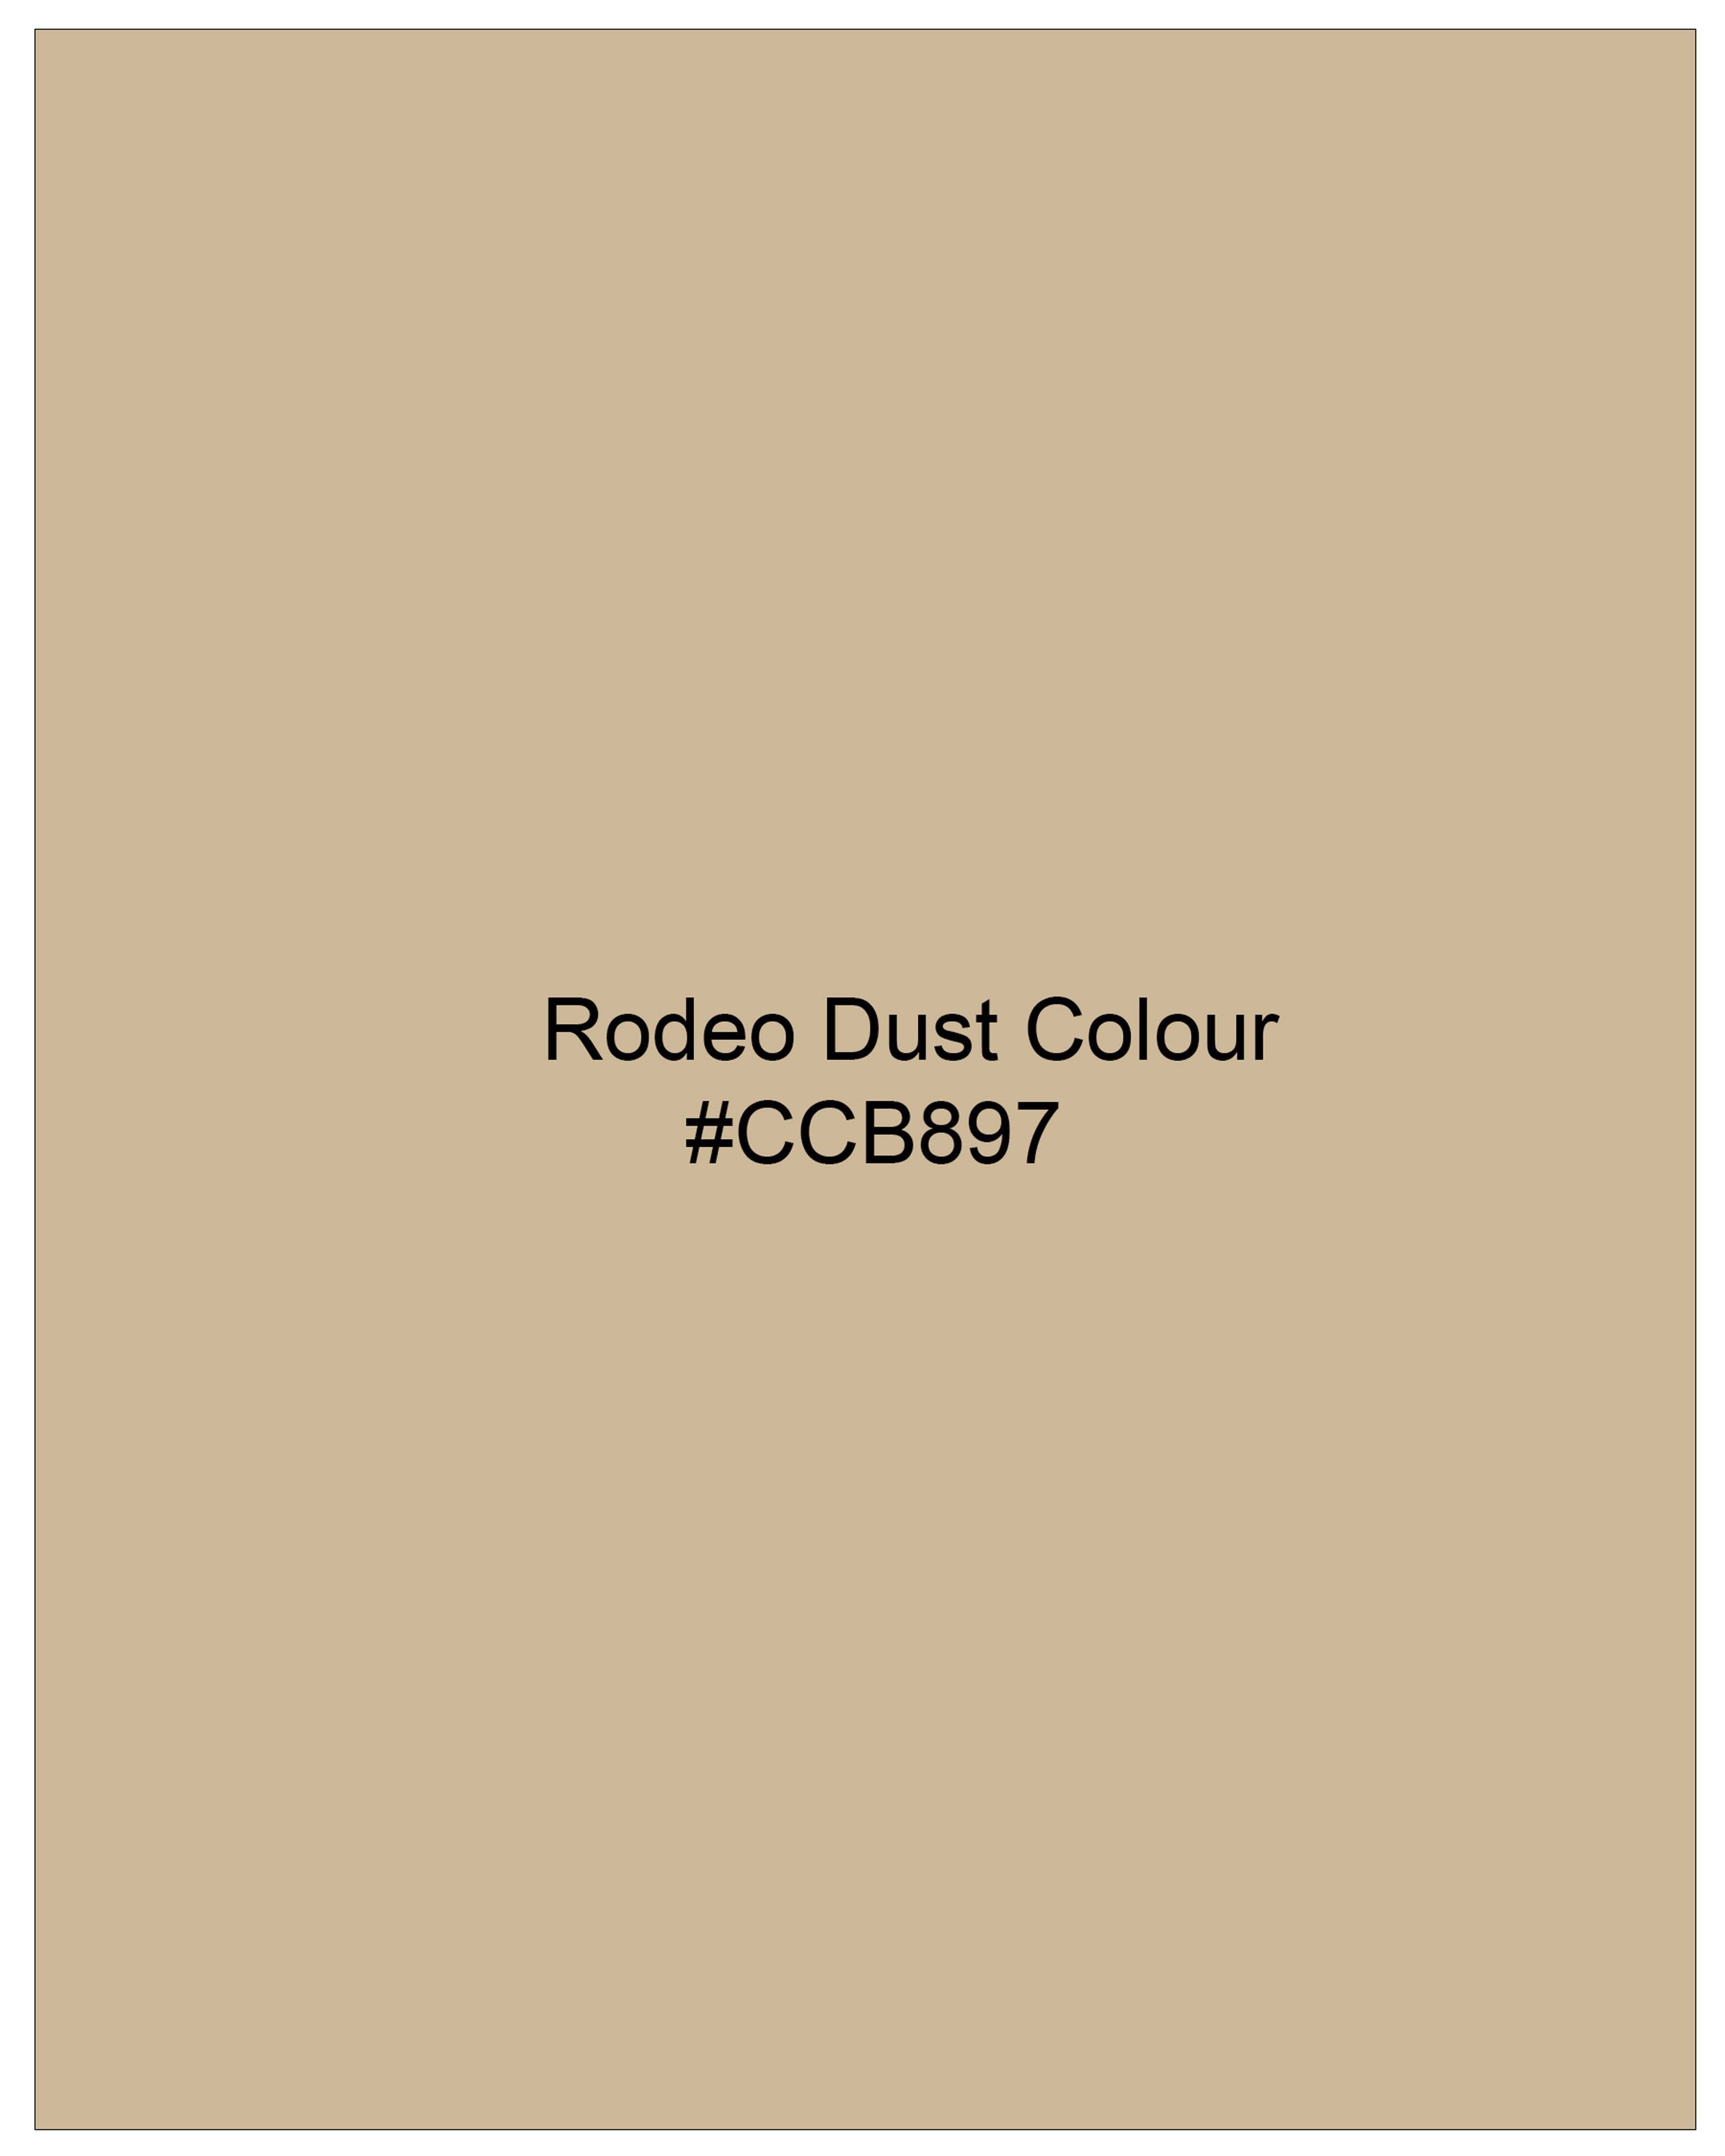 Rodeo Dust Cream Double Breasted Blazer BL2070-DB-36, BL2070-DB-38, BL2070-DB-40, BL2070-DB-42, BL2070-DB-44, BL2070-DB-46, BL2070-DB-48, BL2070-DB-50, BL2070-DB-52, BL2070-DB-54, BL2070-DB-56, BL2070-DB-58, BL2070-DB-60